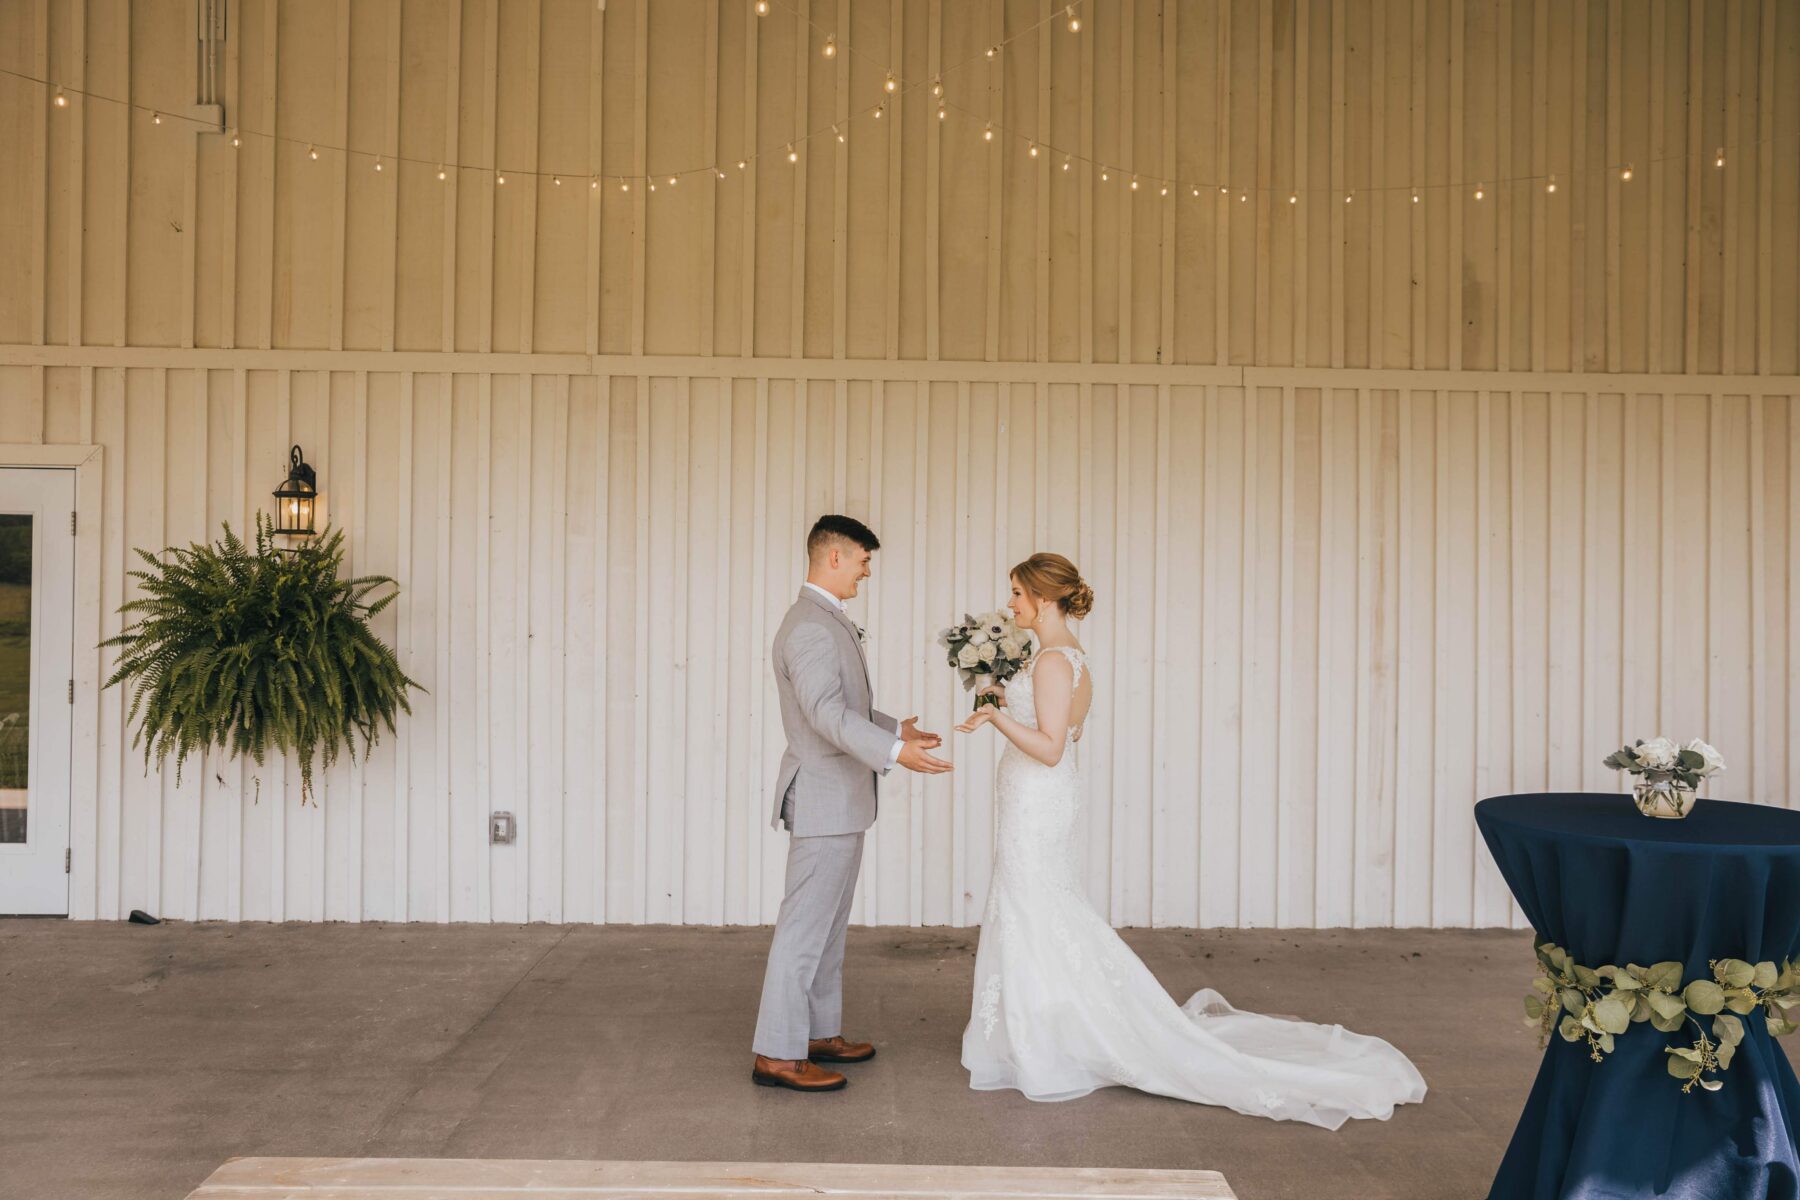 Wedding first look: White Dove Barn Wedding by Grace Upon Grace Photography featured on Nashville Bride Guide